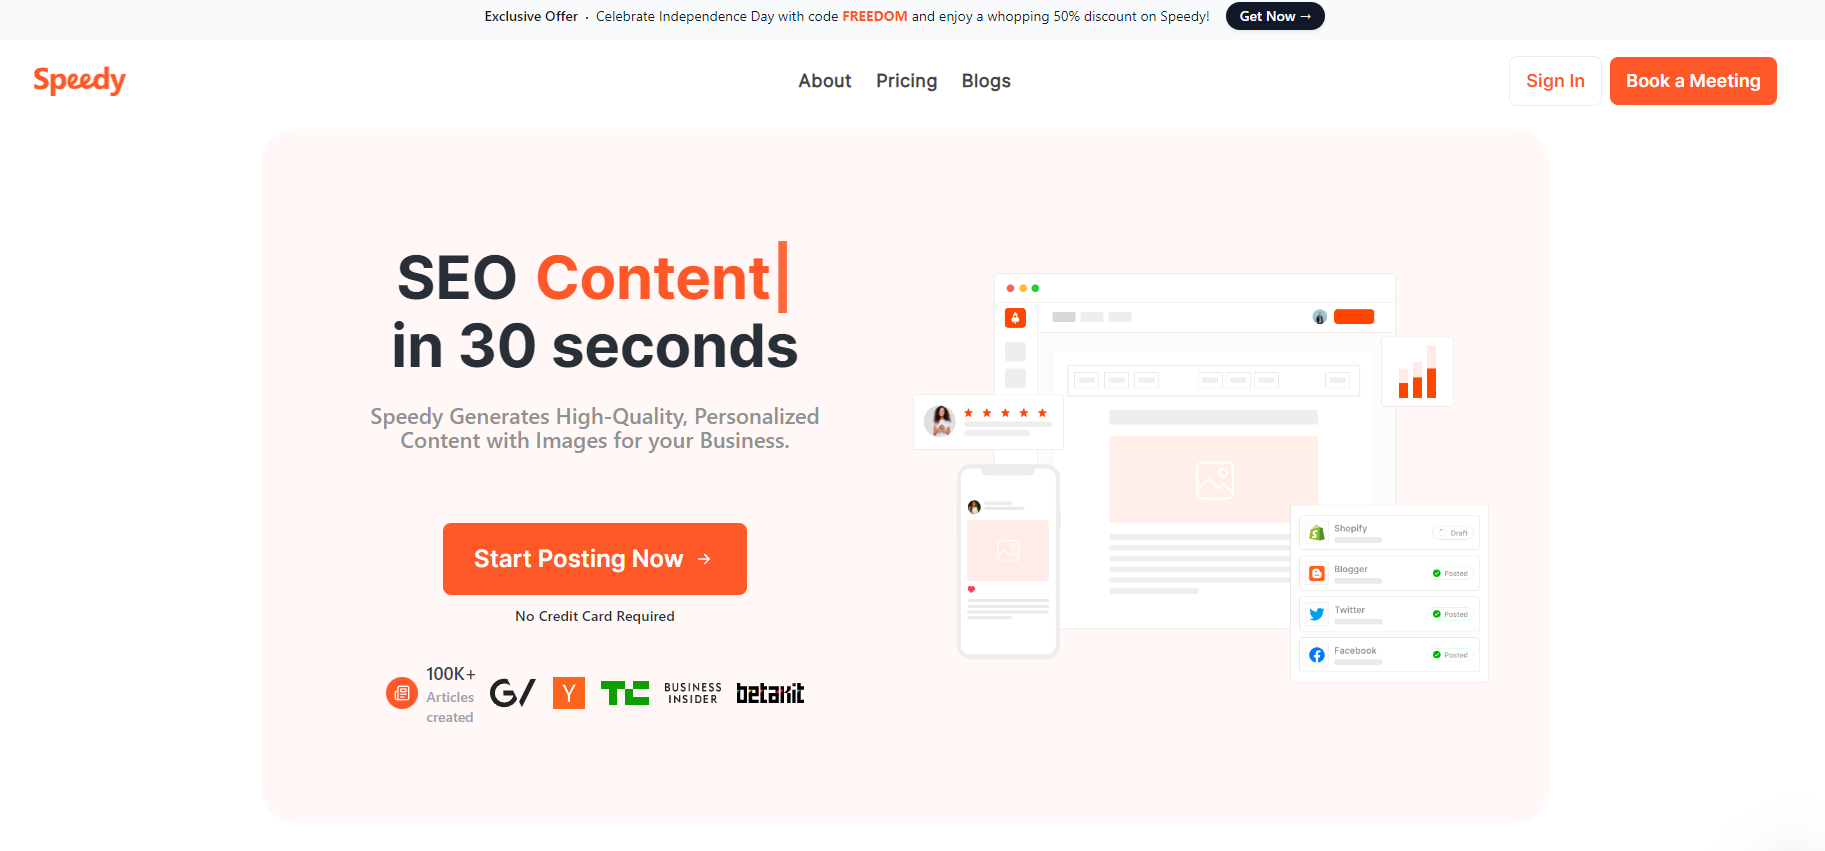 With a staggering $2.5M in funding, Speedy is poised to revolutionize the way businesses generate high-quality, personalized content with images.